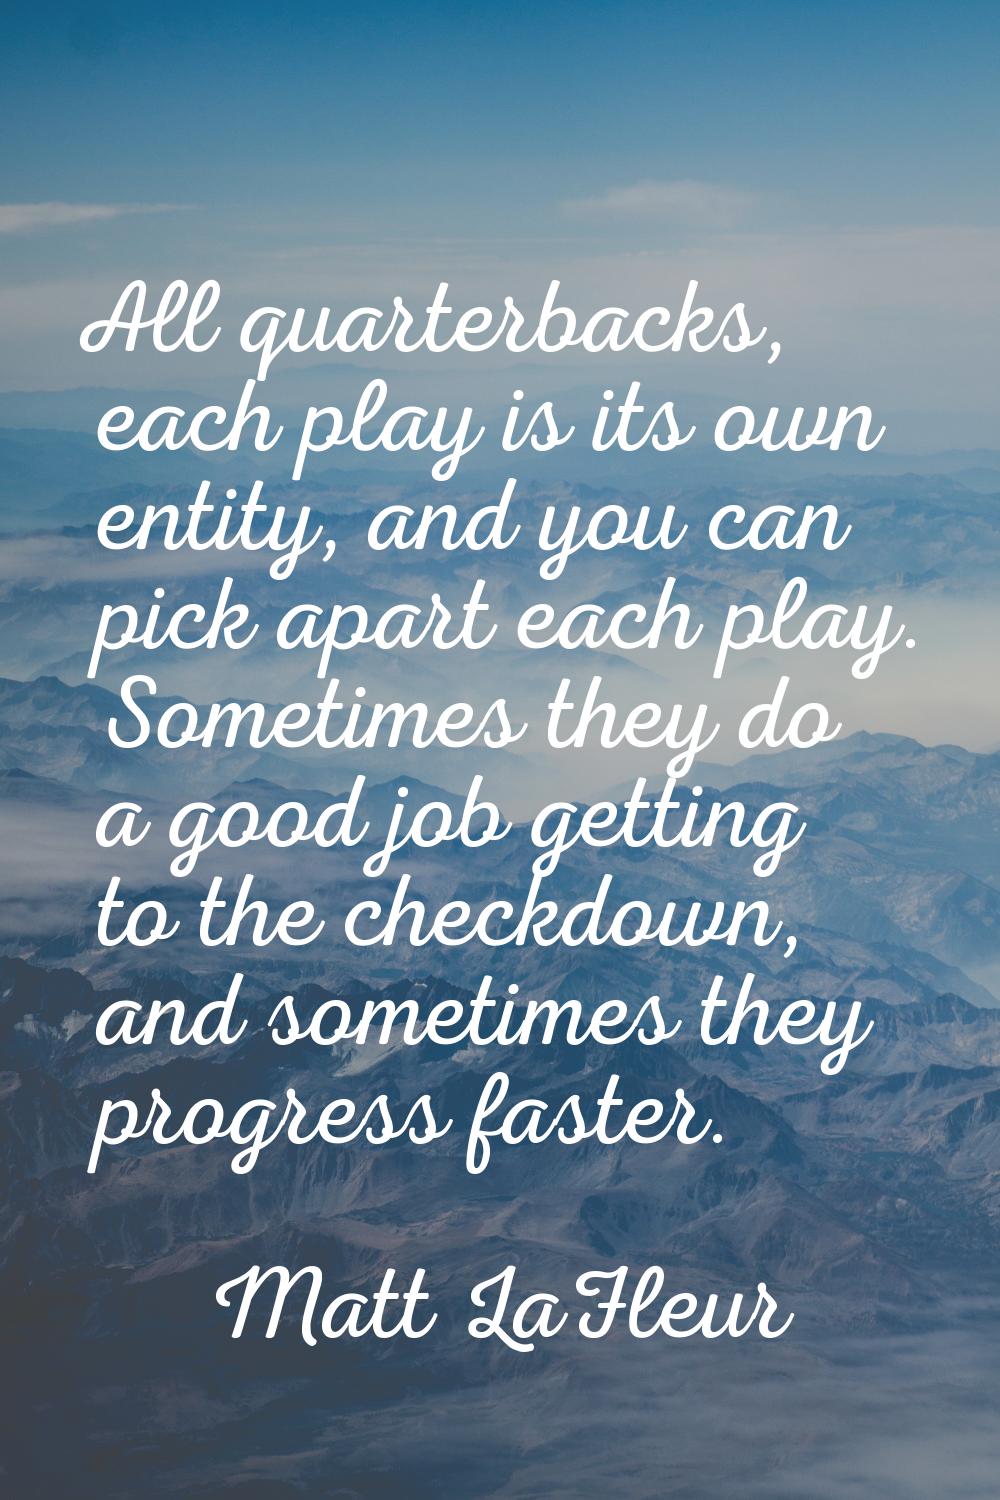 All quarterbacks, each play is its own entity, and you can pick apart each play. Sometimes they do 